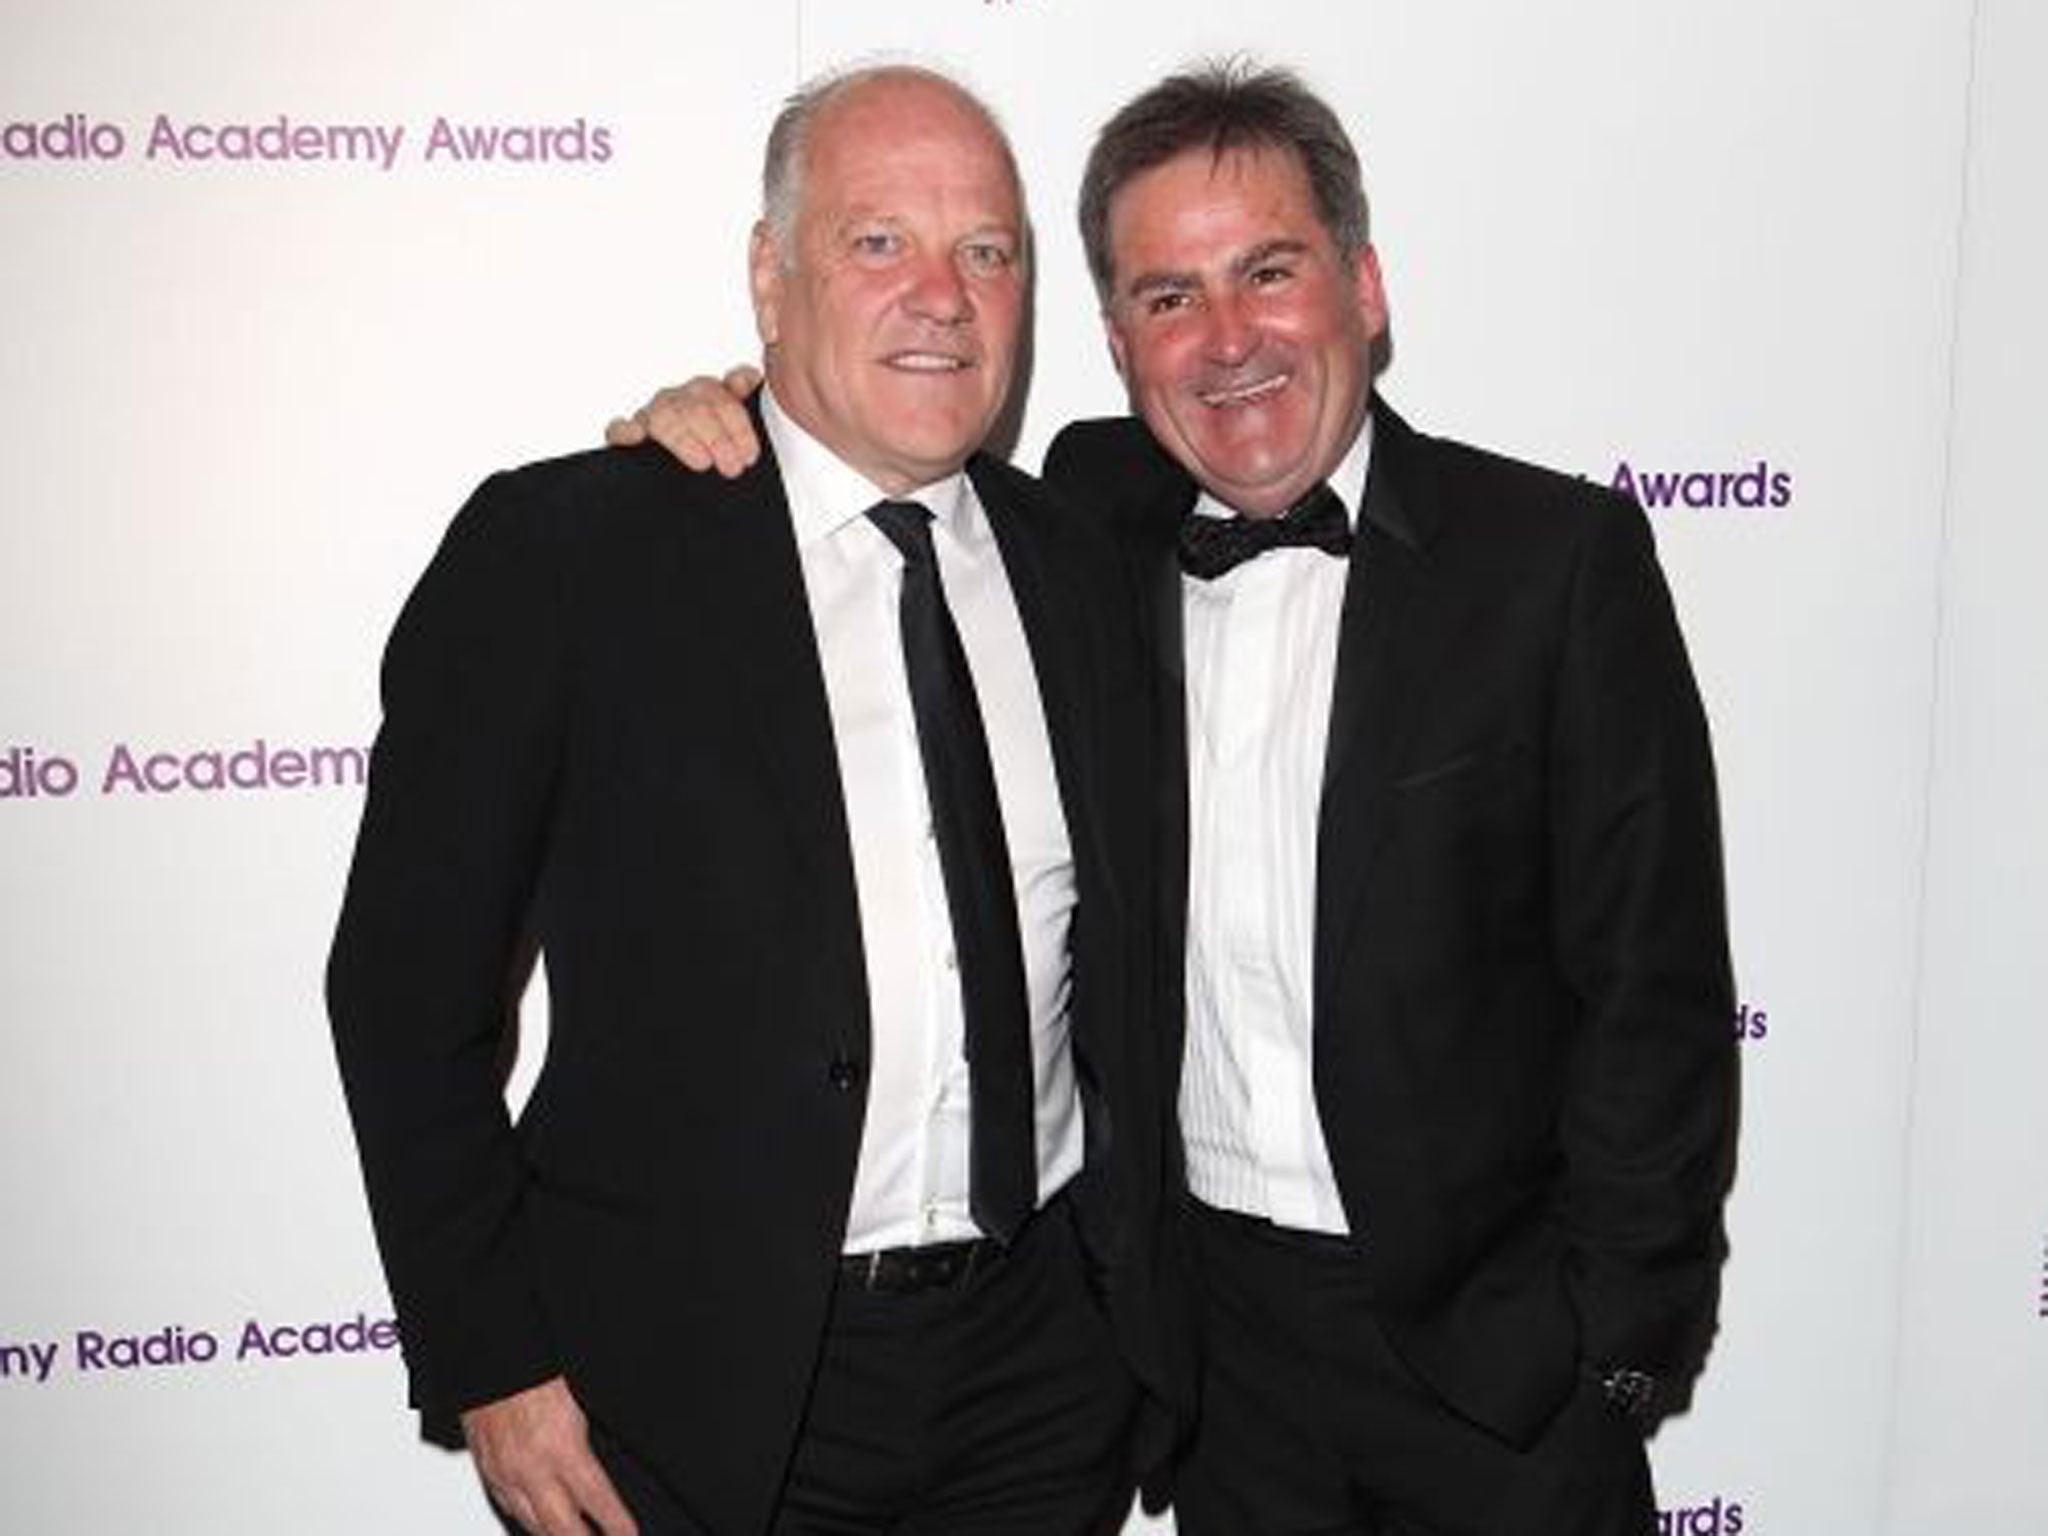 BT’s decision to use Andy Gray makes him a controversial bedfellow, so to speak, with their star female presenter Clare Balding